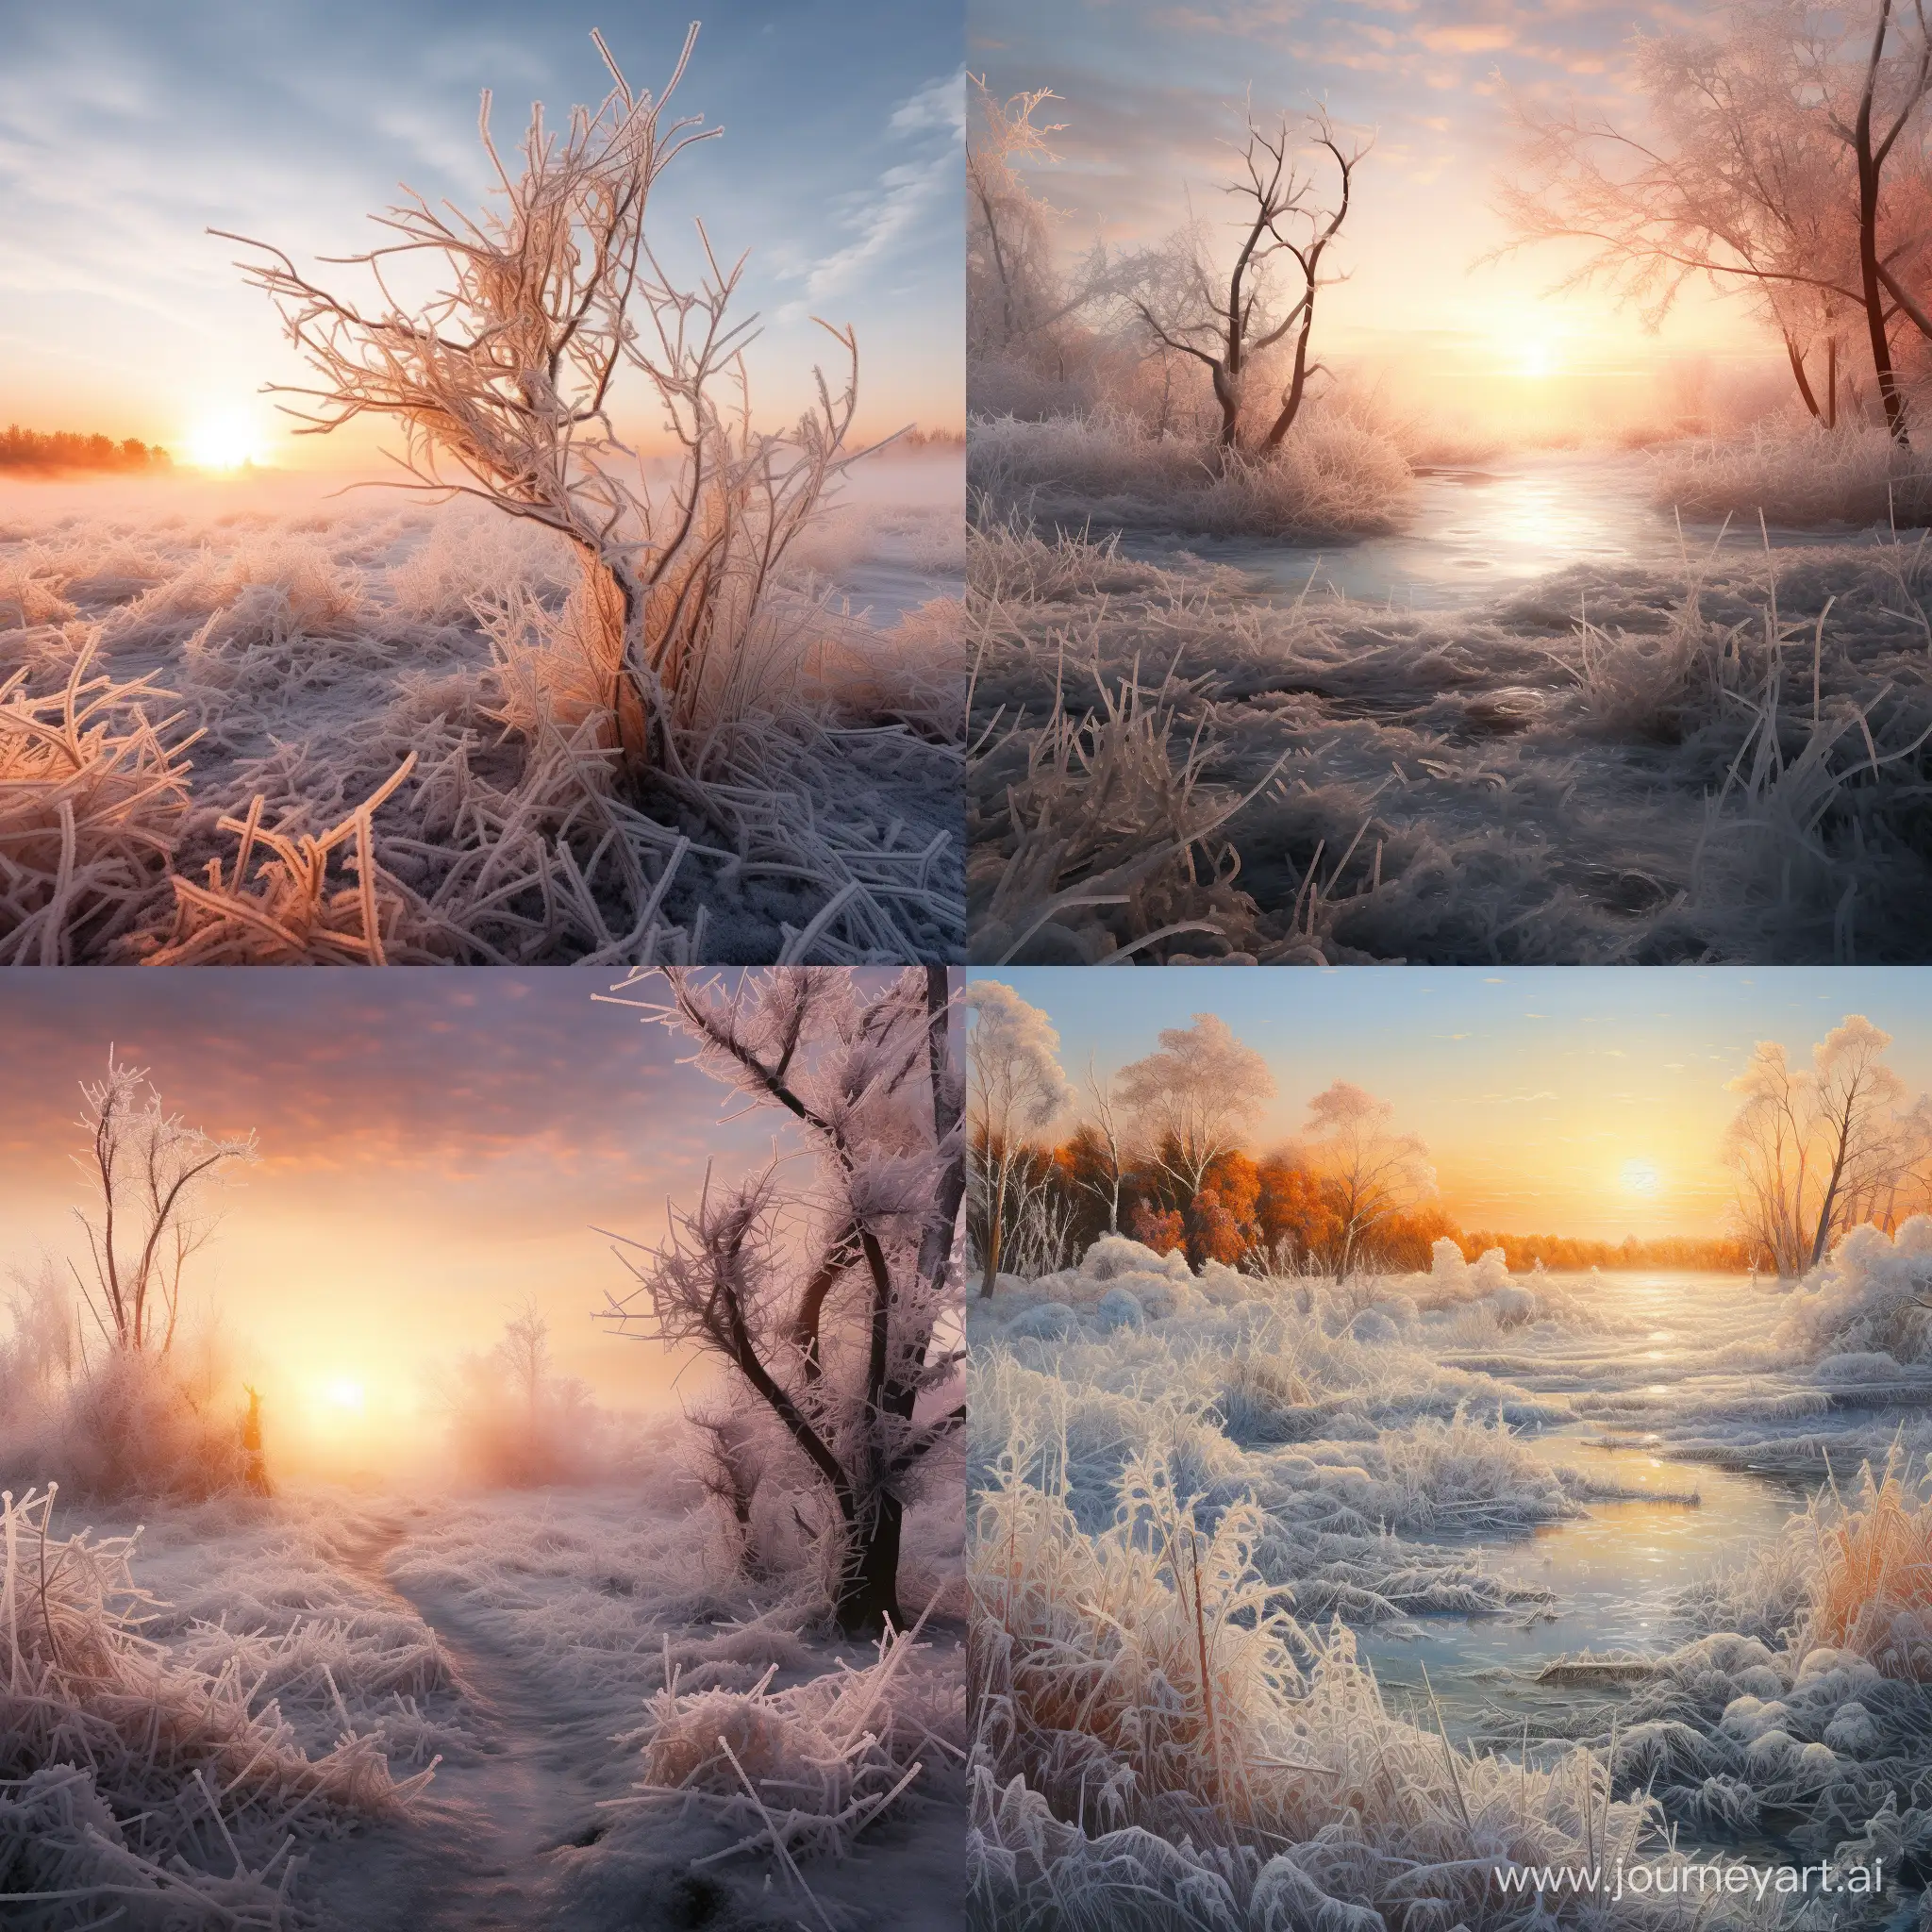 Enchanting-Winter-Day-Frost-and-Sun-in-a-Marvelous-11-Aspect-Ratio